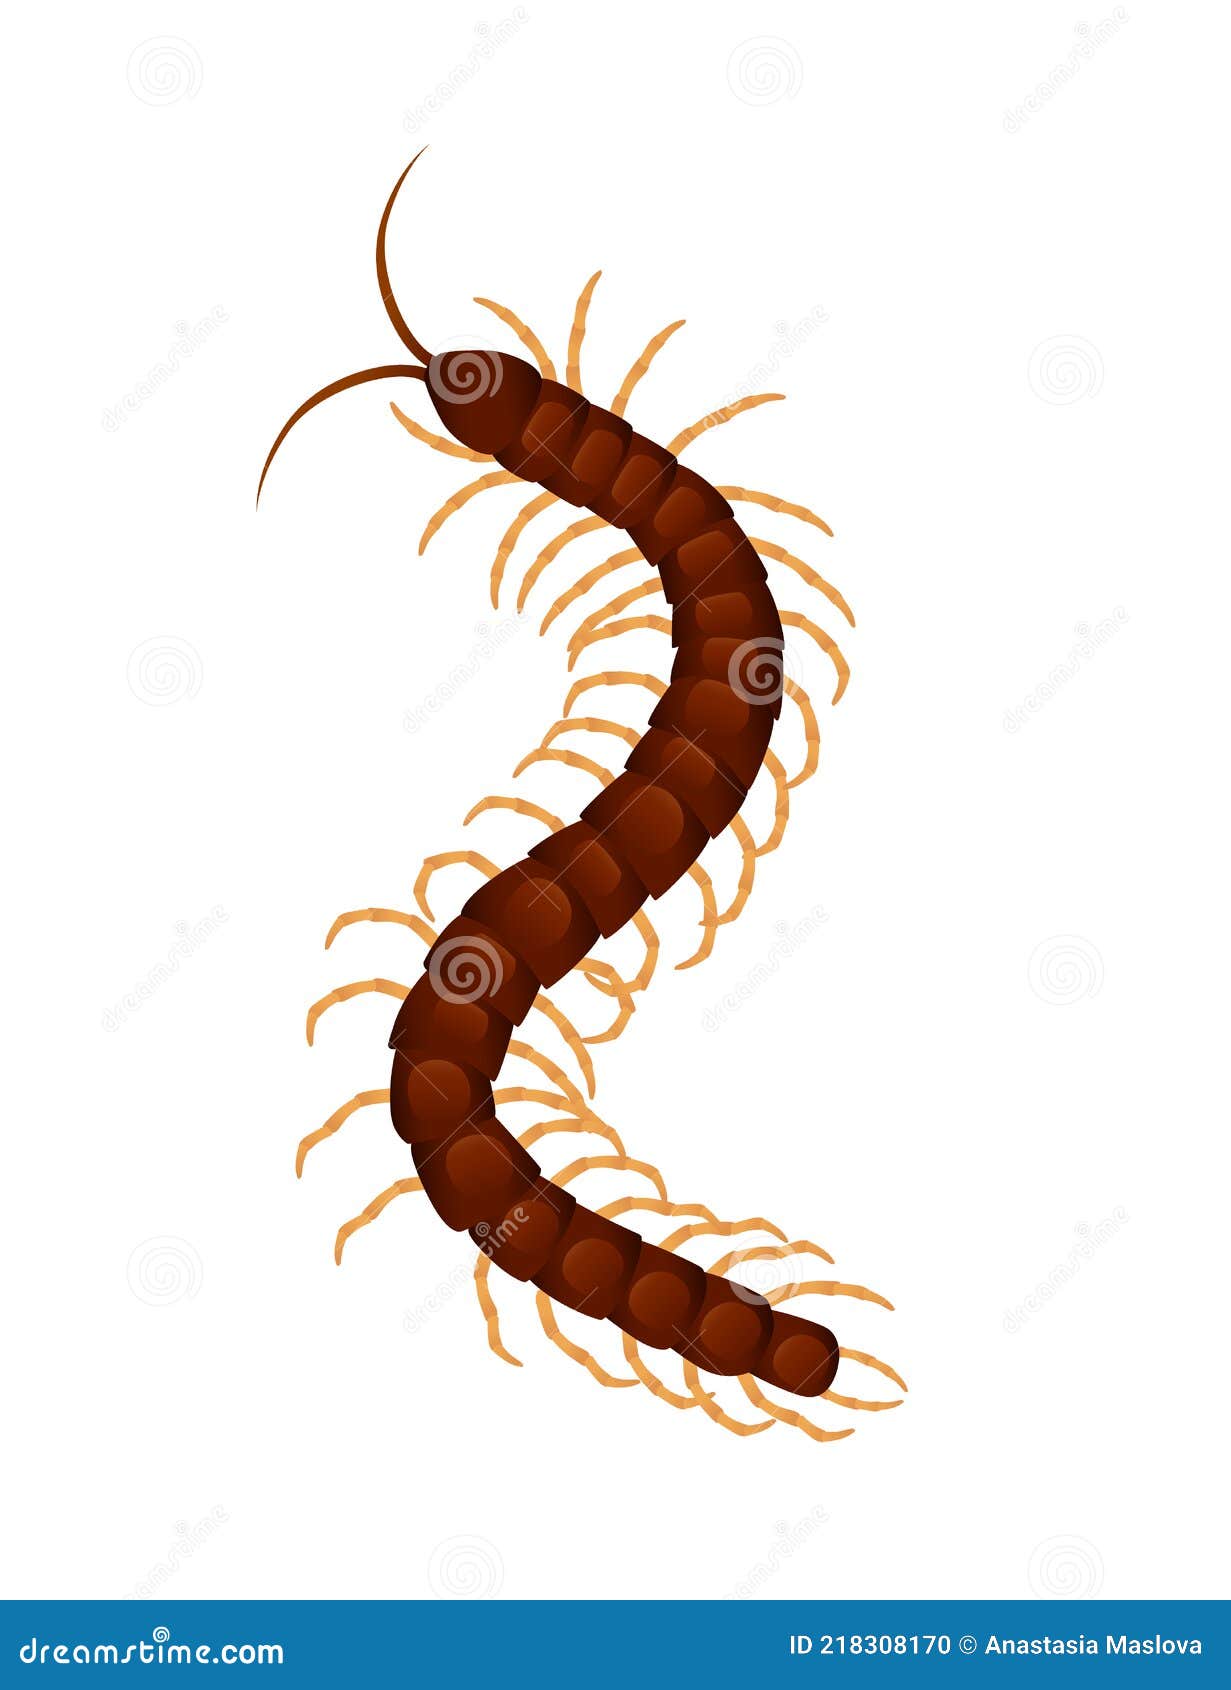 Top View Illustration on Centipede Cartoon Insect Design Vector  Illustration Isolated on White Background Stock Vector - Illustration of  crawl, toxic: 218308170